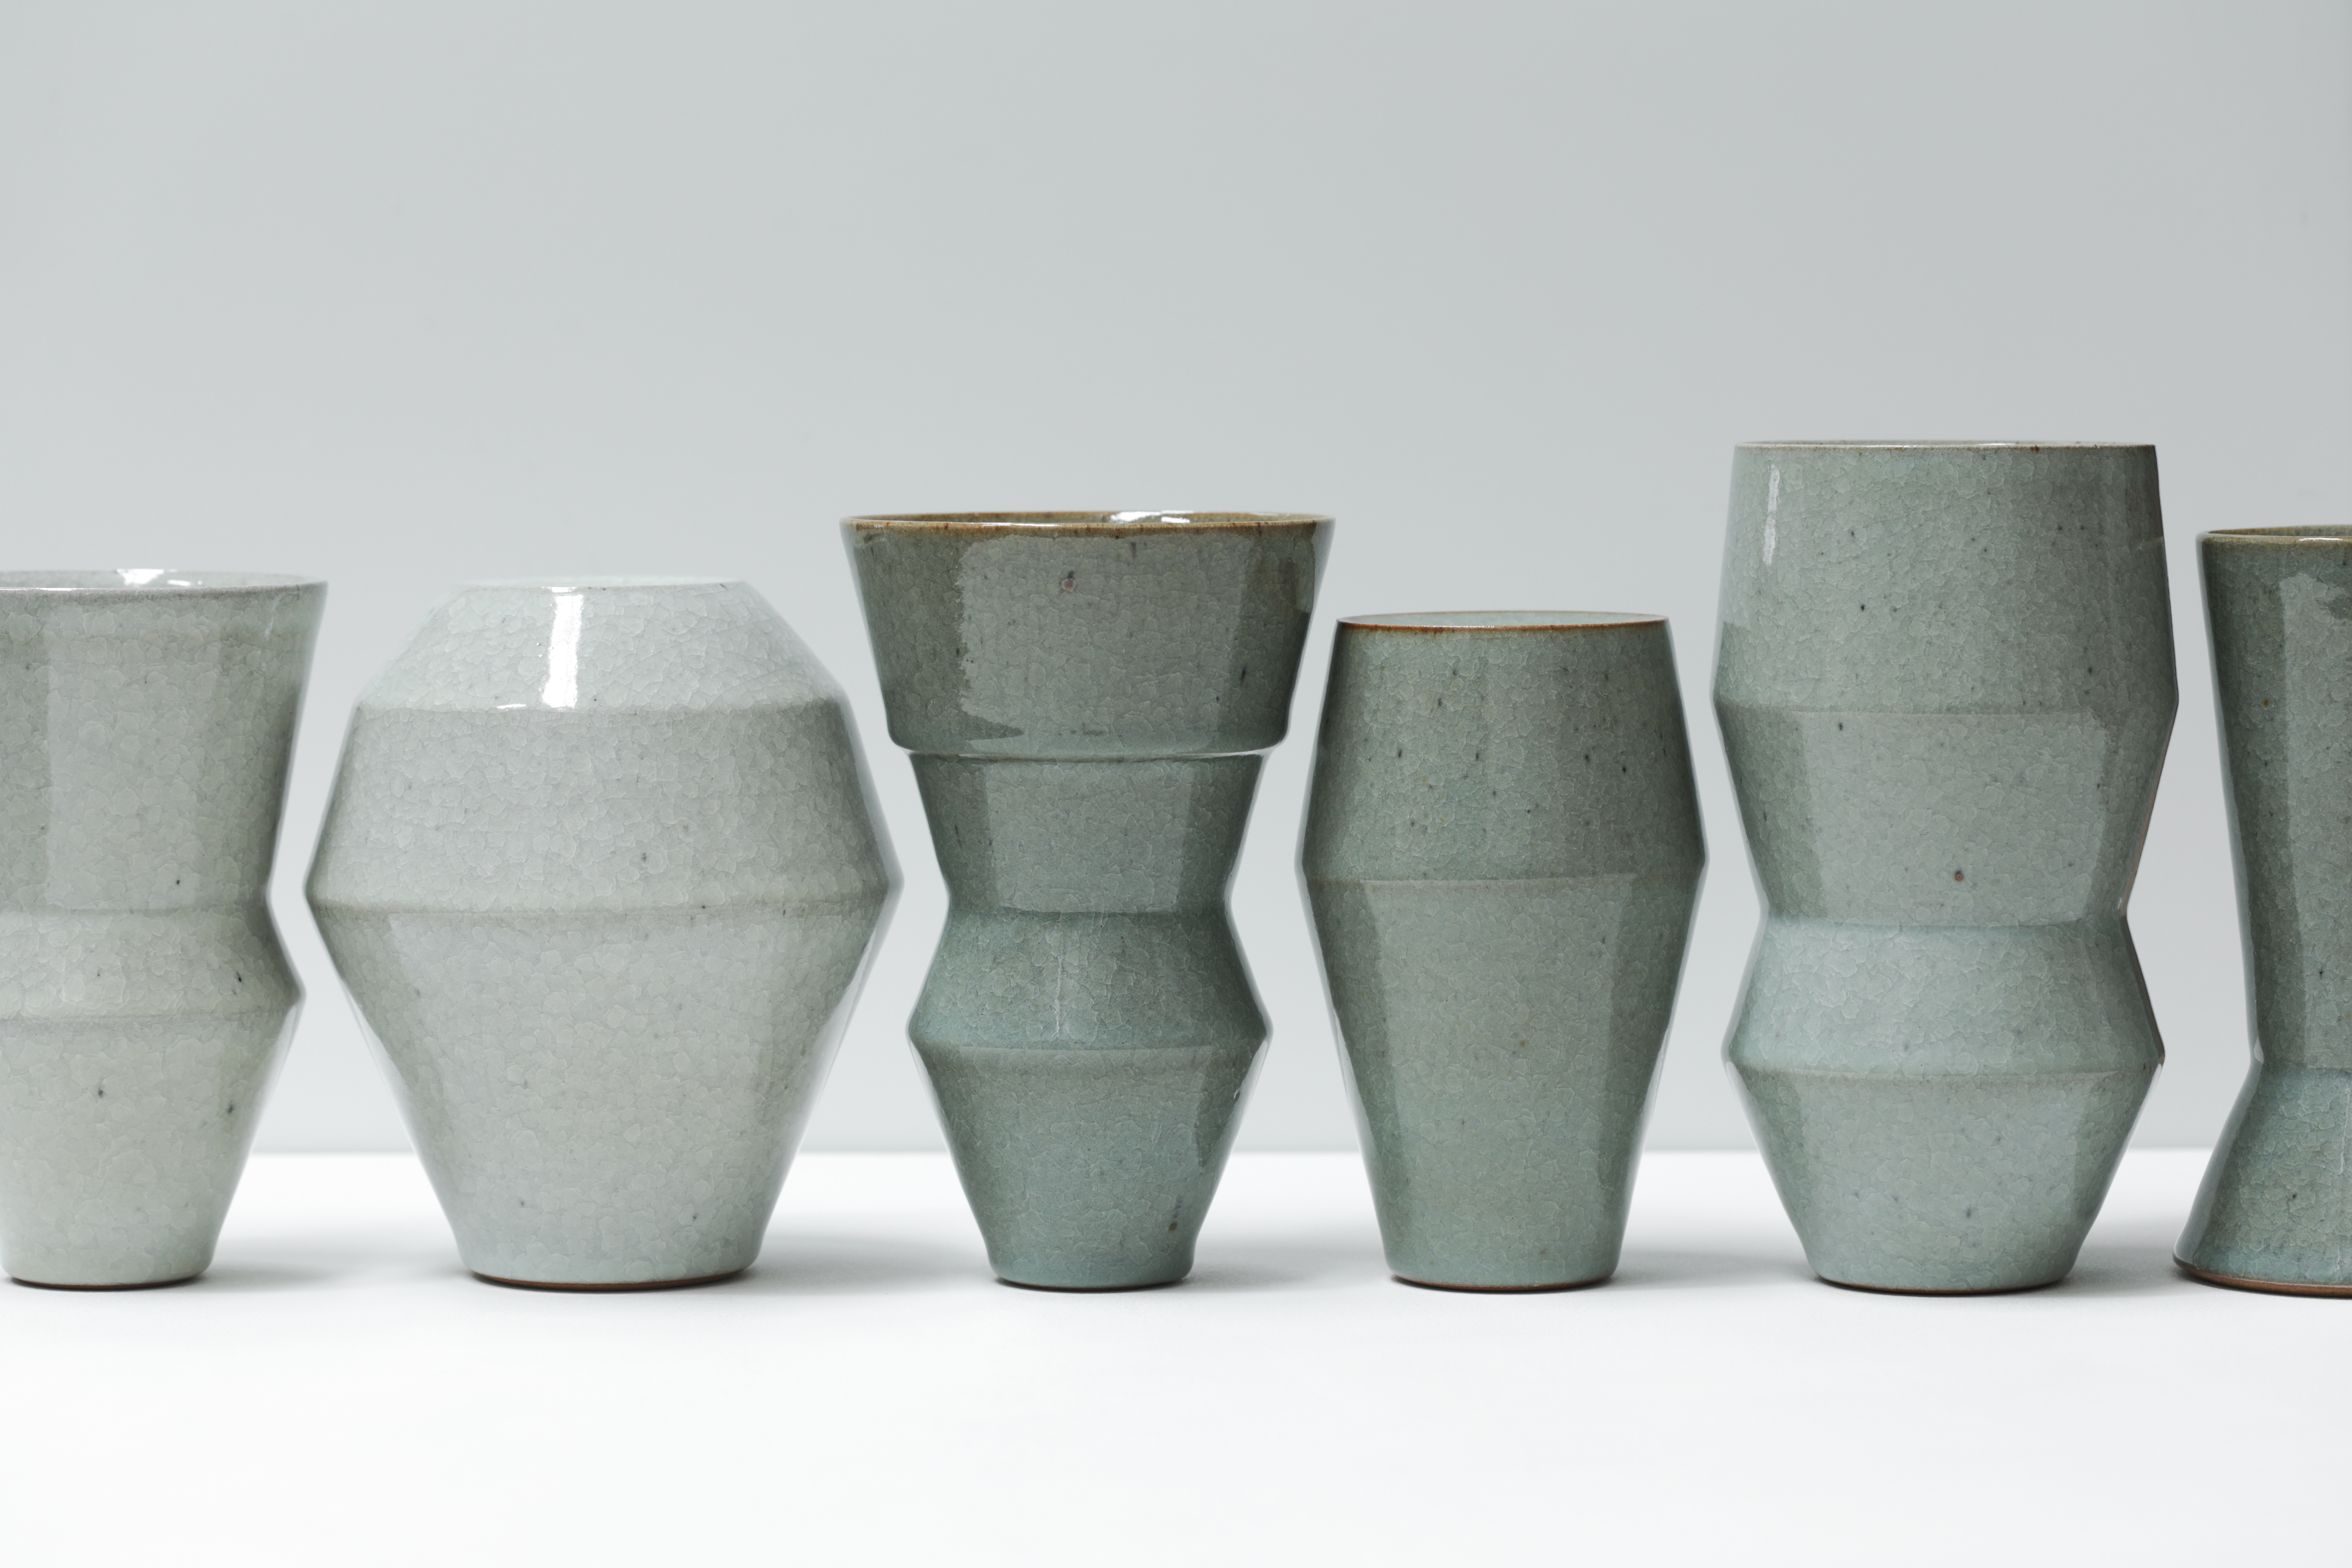 A row of green-toned ceramic vases